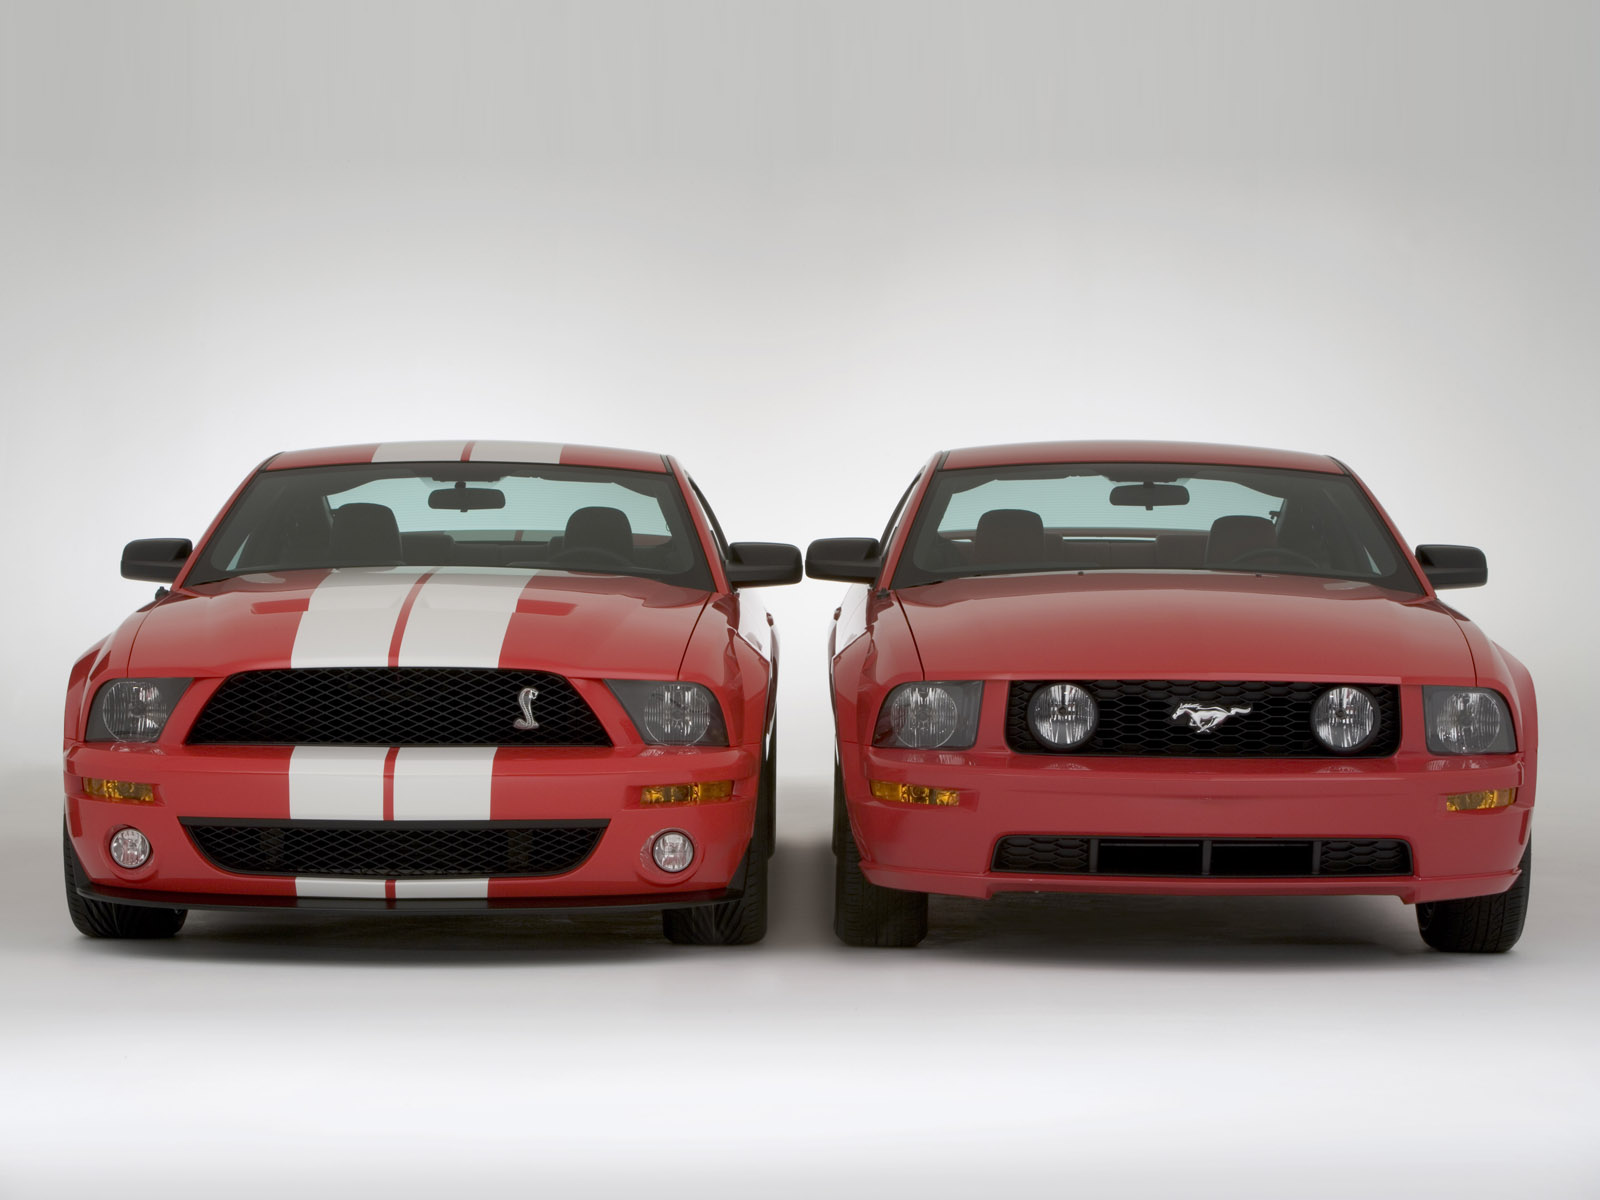 Ford Mustang Shelby GT500 - Autoblog